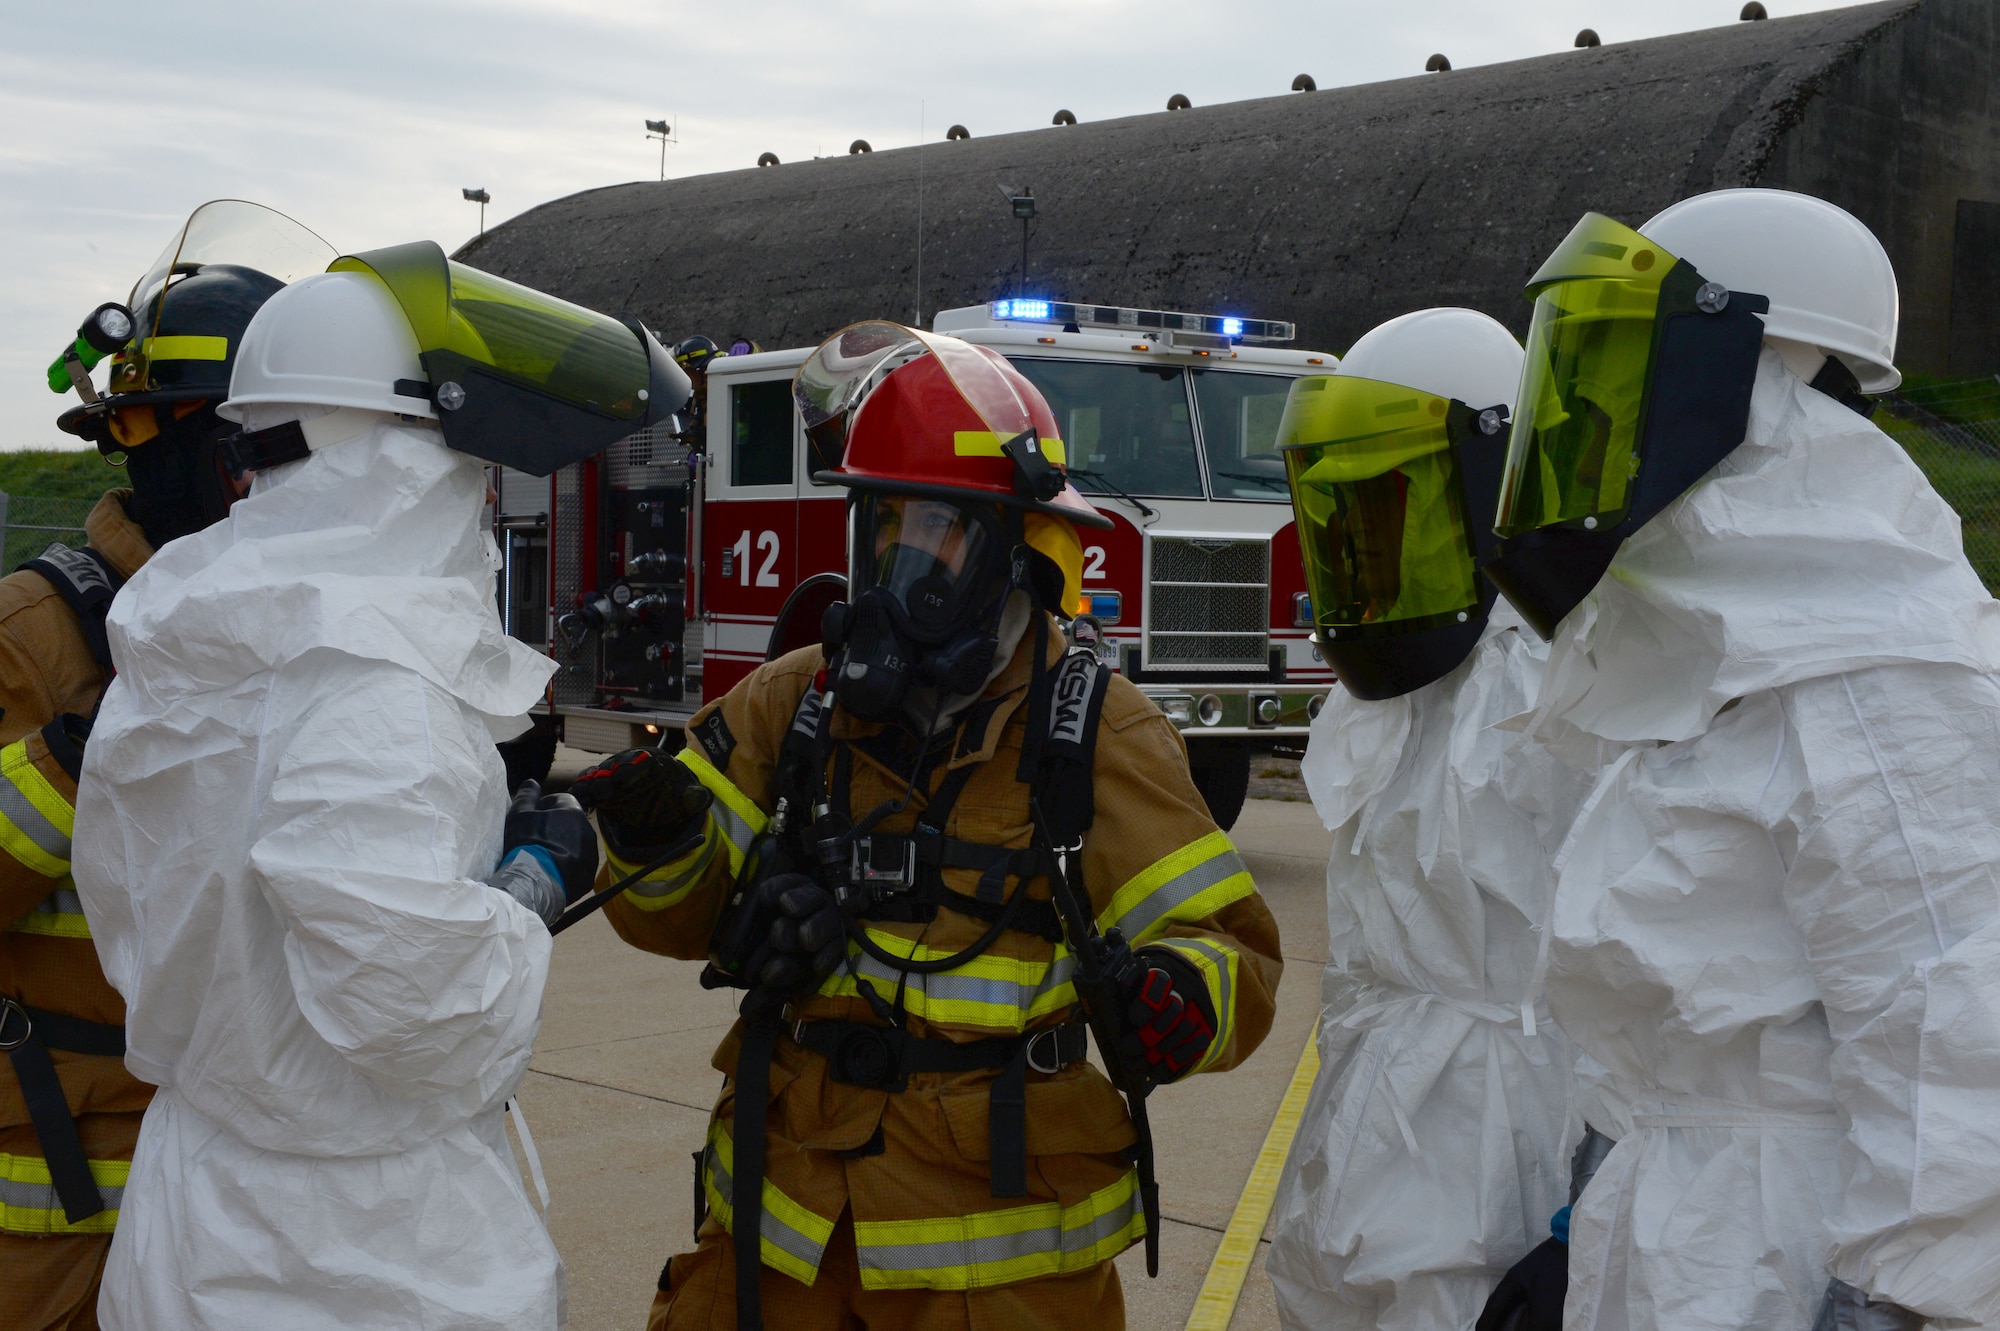 U.S. Air Force Staff Sgt. Jessica Morgan, a 52nd Civil Engineer Squadron firefighter from Chicago, middle, communicates with the 52nd CES water fuels systems maintenance Airmen during a fuel spill exercise Sept. 12, 2014, at Spangdahlem Air Base, Germany. The exercise also tested the way different agencies communicate to each other when responding to an emergency. (U.S. Air Force photo by Airman 1st Class Dylan Nuckolls/Released)